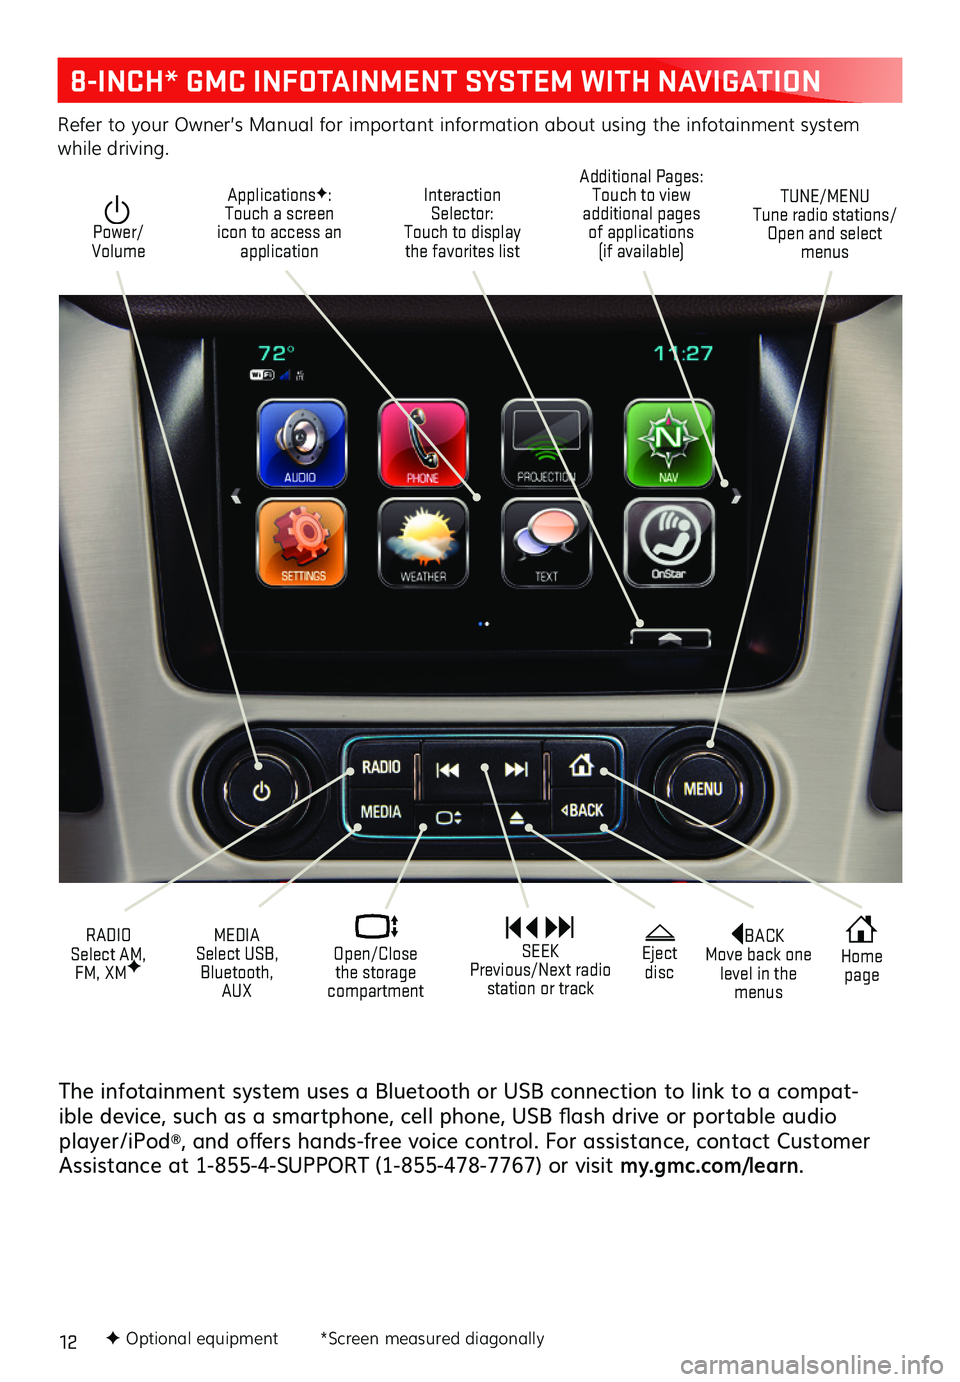 GMC YUKON 2019  Get To Know Guide 12
The infotainment system uses a Bluetooth or USB connection to link to a compat-ible device,  such as a  smartphone,  cell phone,  USB flash  drive  or portable  audio player/iPod®, 